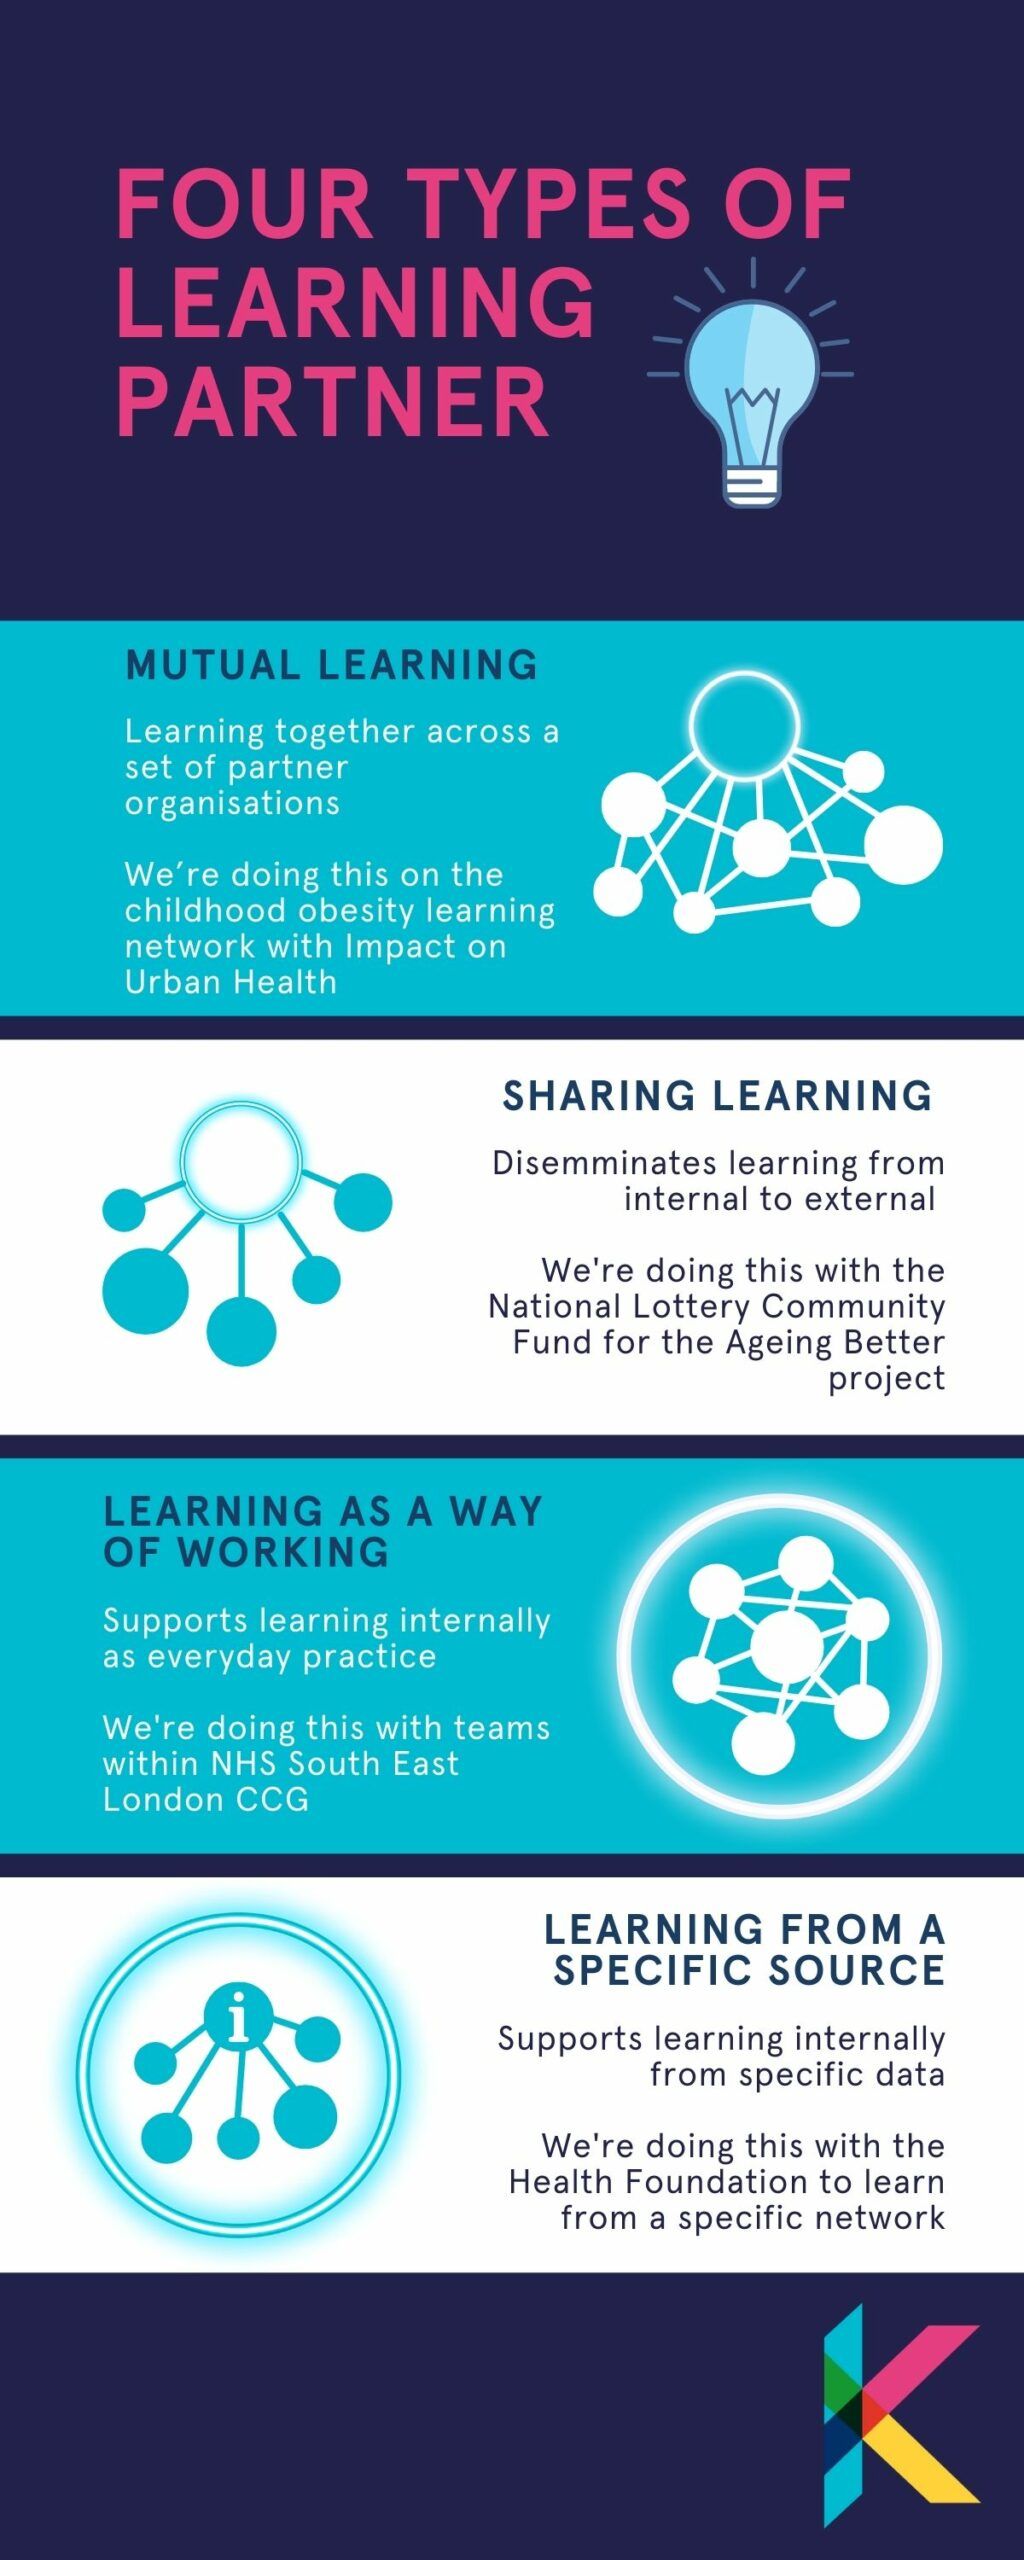 Four different types of learning partner